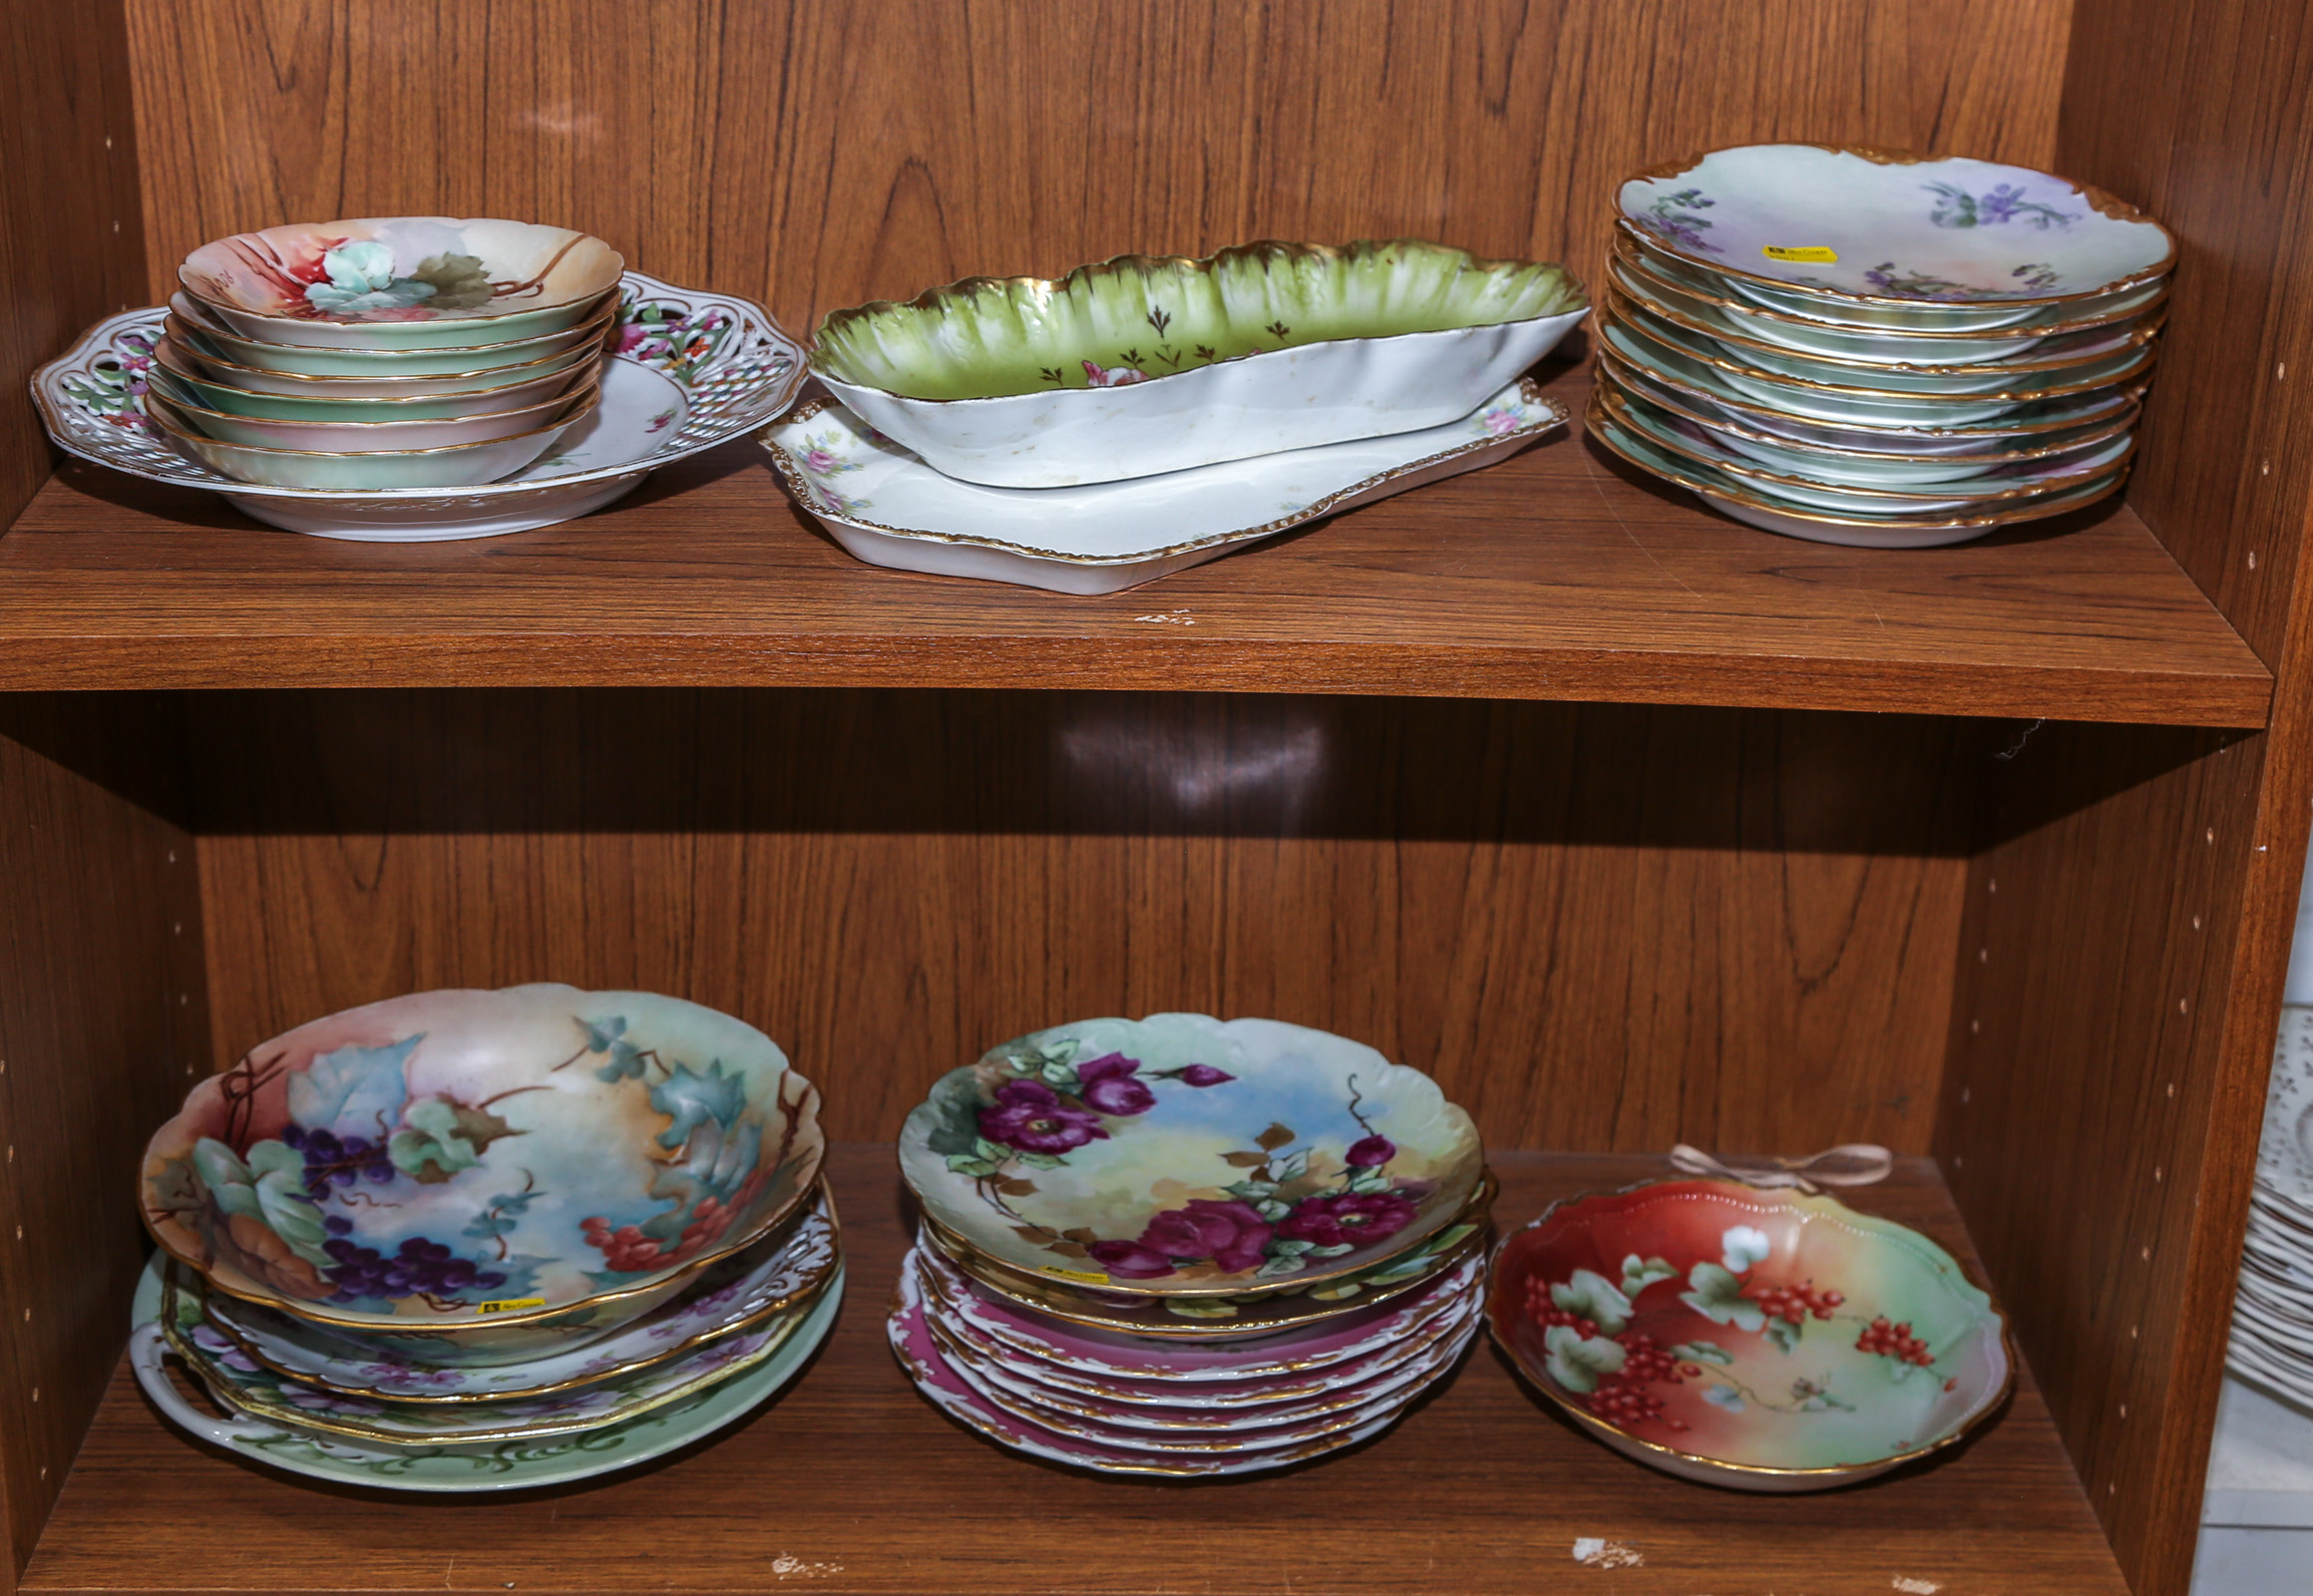 SELECTION OF HAND-PAINTED LIMOGES